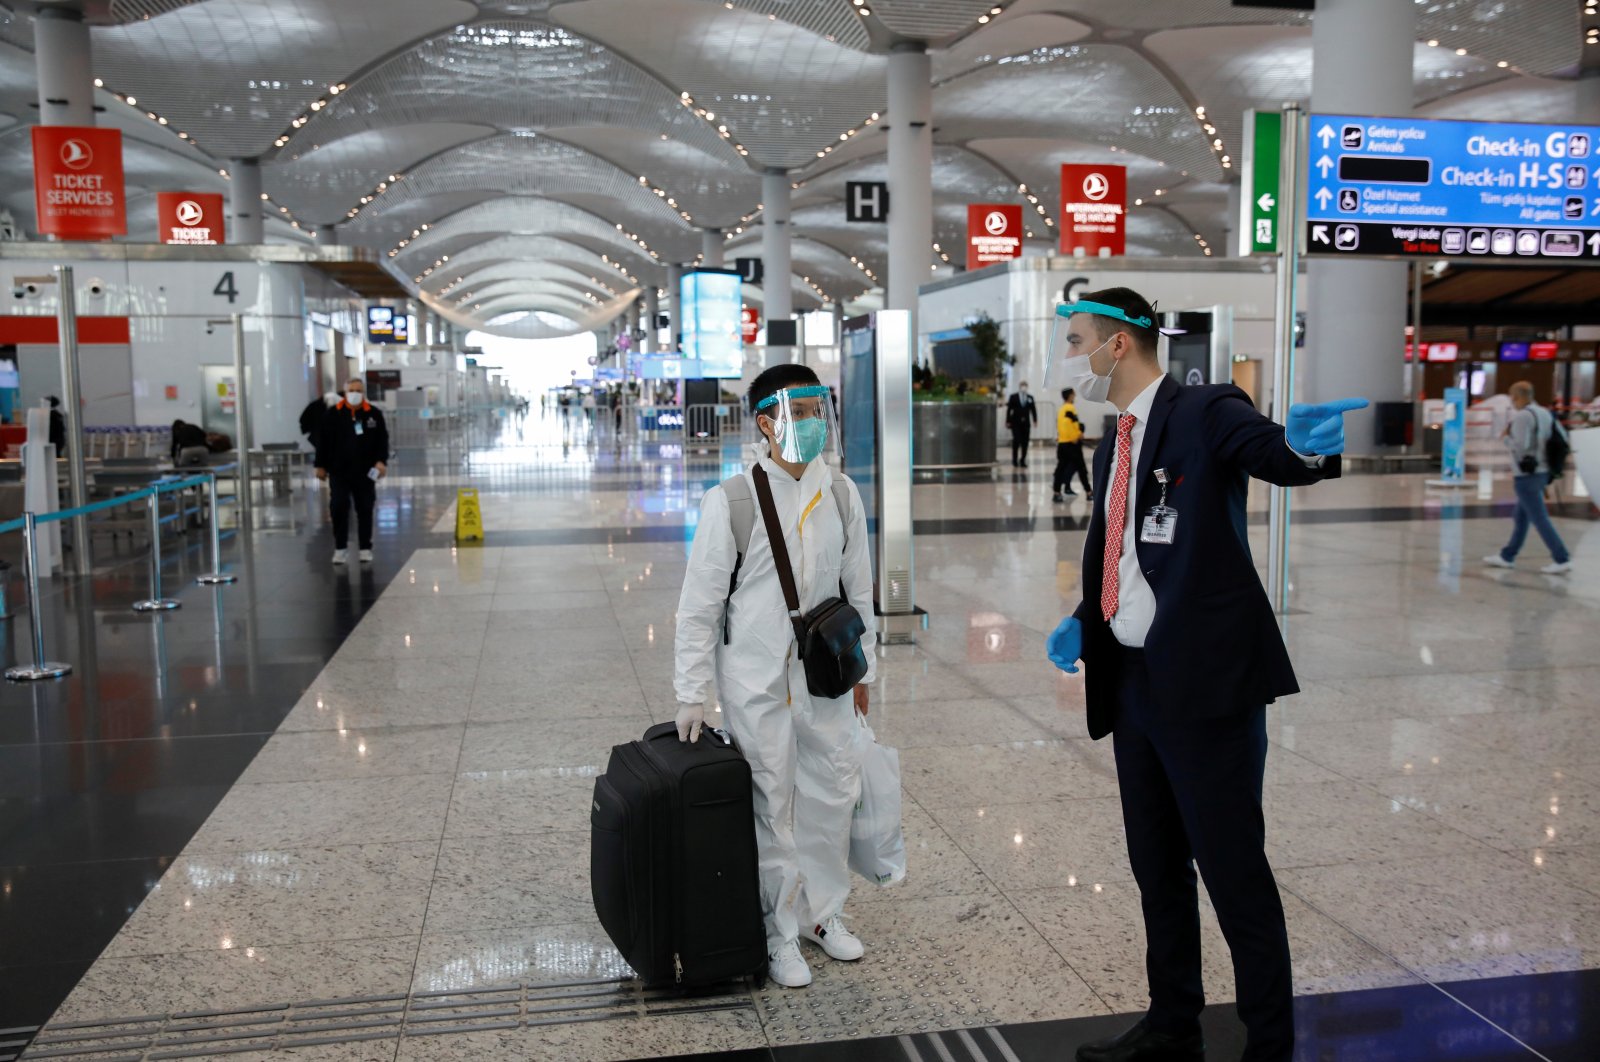 An employee helps a passenger wearing a protective suit at the Istanbul Airport during the first day of resumed domestic flights, which had been halted since March 26 amid the spread of the coronavirus disease (COVID-19), in Istanbul, June 1, 2020. (Reuters Photo)